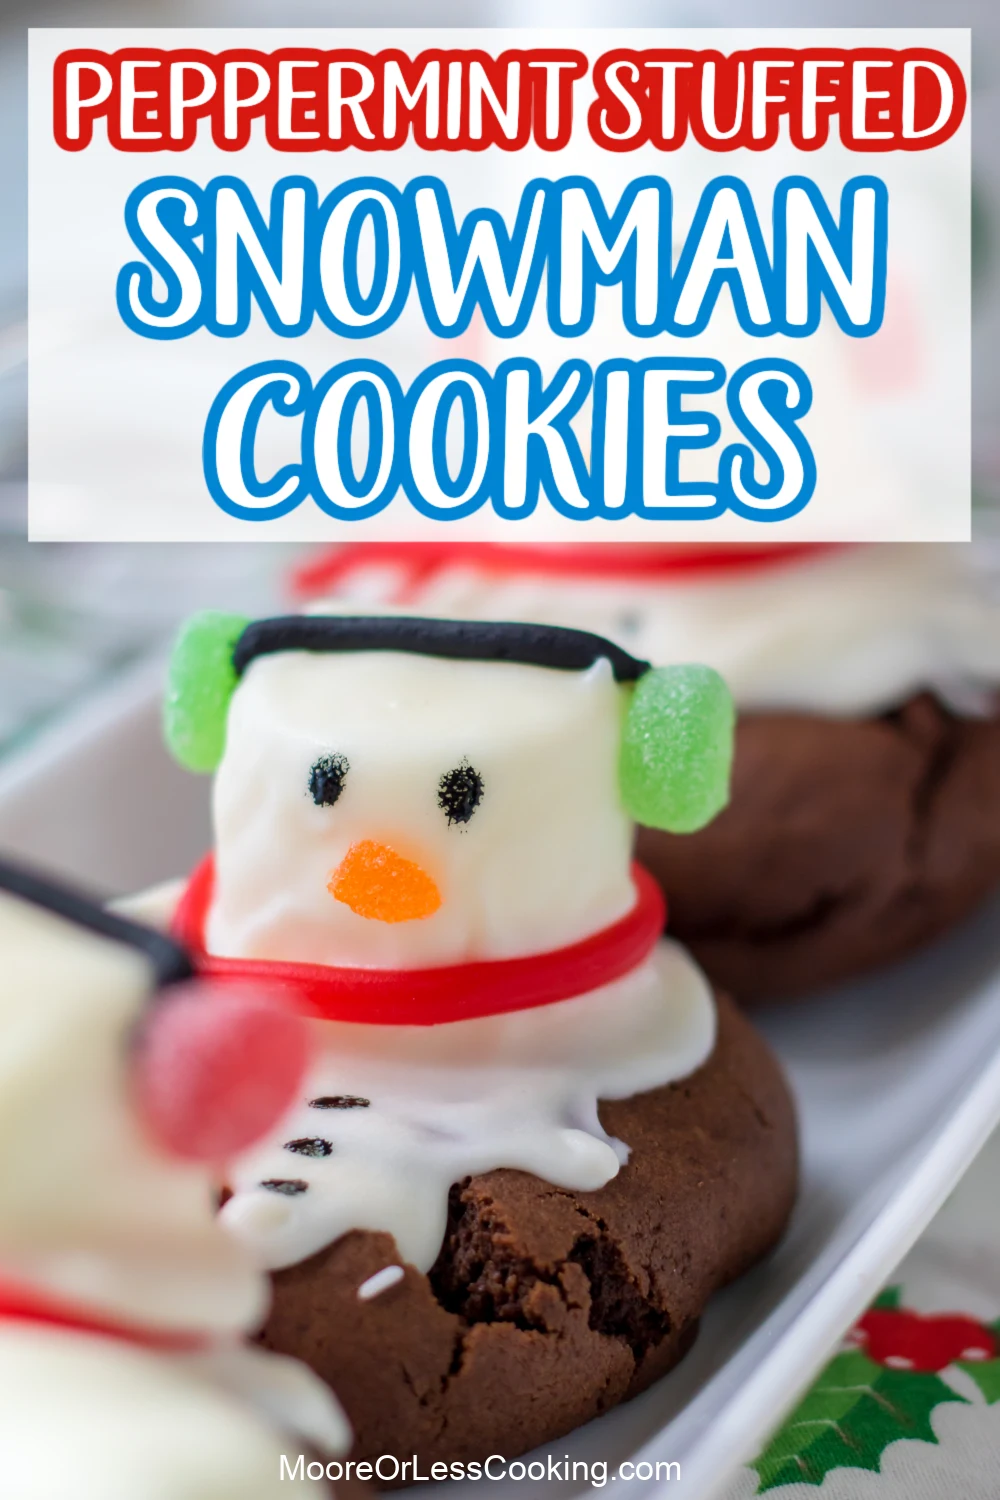 These Peppermint Stuffed Snowman Cookies are the ultimate Christmas cookies. Thick, rich, soft, chocolate cookies are stuffed with peppermint patties and then topped with a marshmallow that gets coated in white almond bark to look like a melted snowman. Decorated with little gumdrop earmuffs these are so cute for the holidays. via @Mooreorlesscook